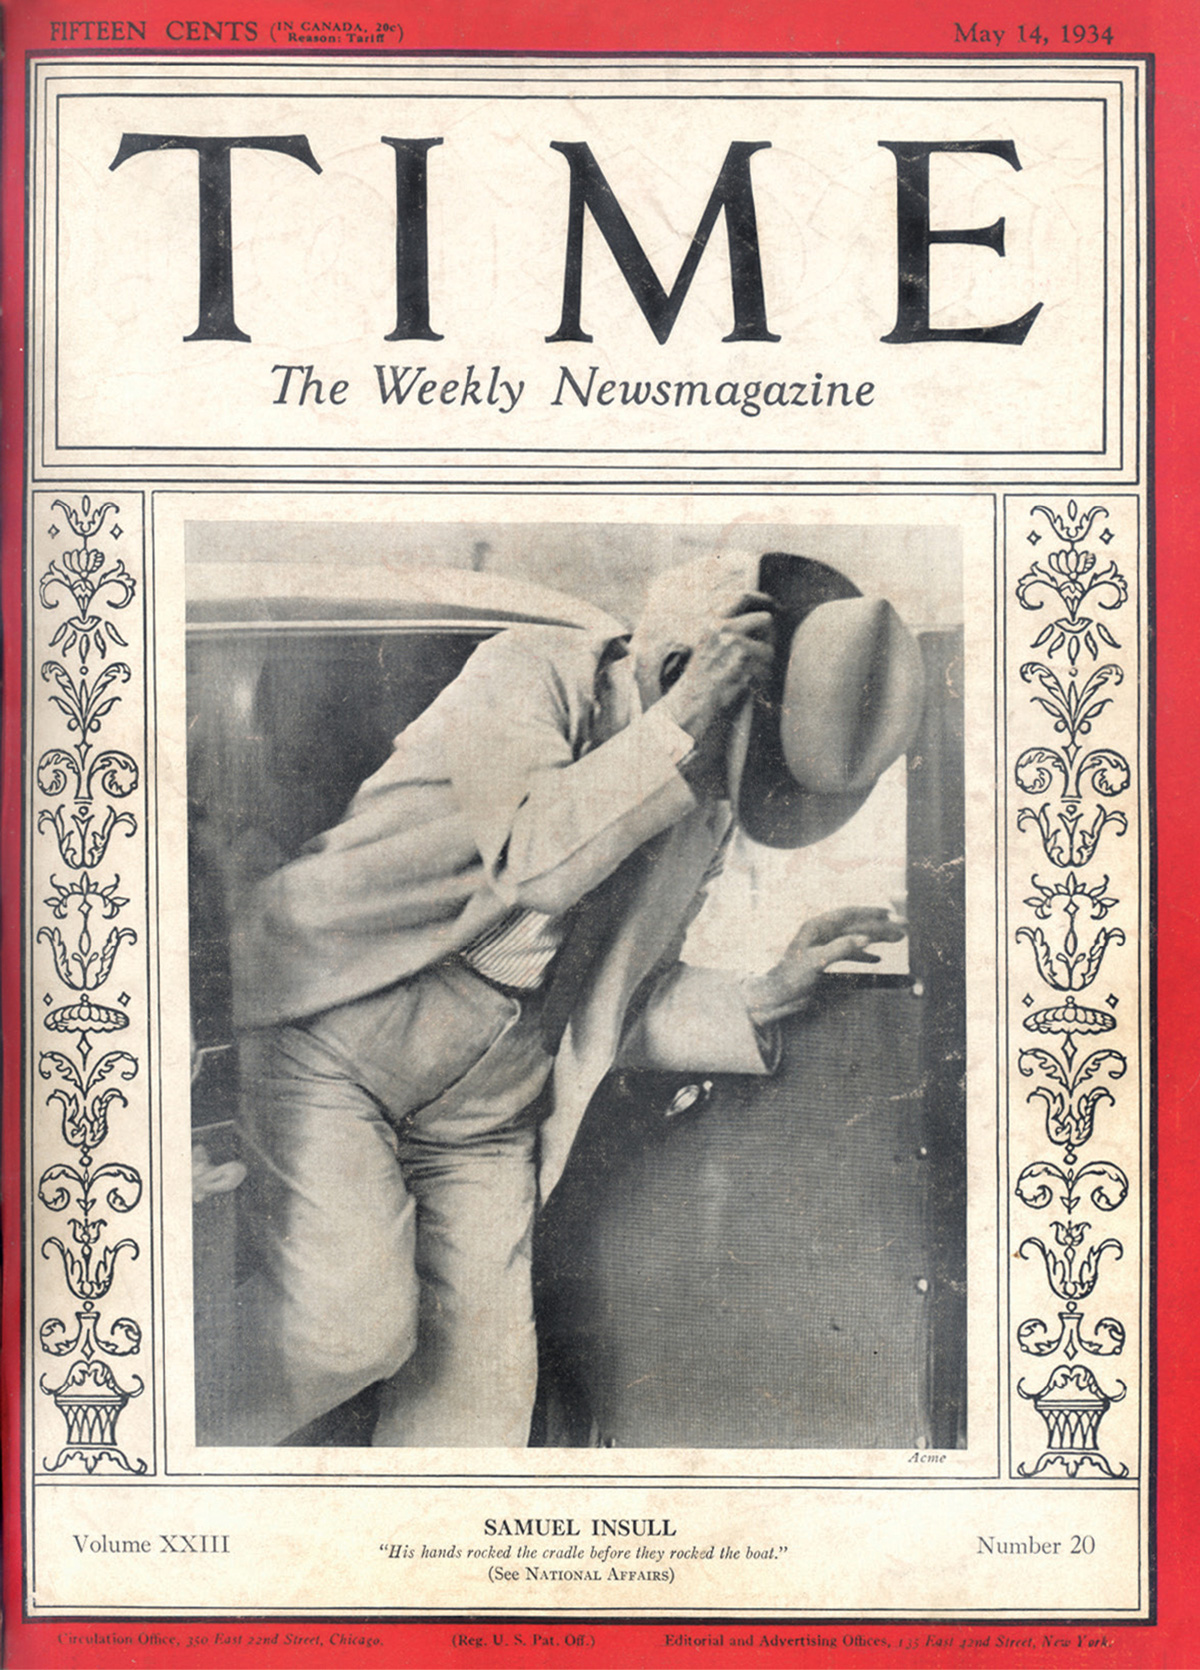 A photograph of Samuel Insull covering his face with his hat on the cover of 